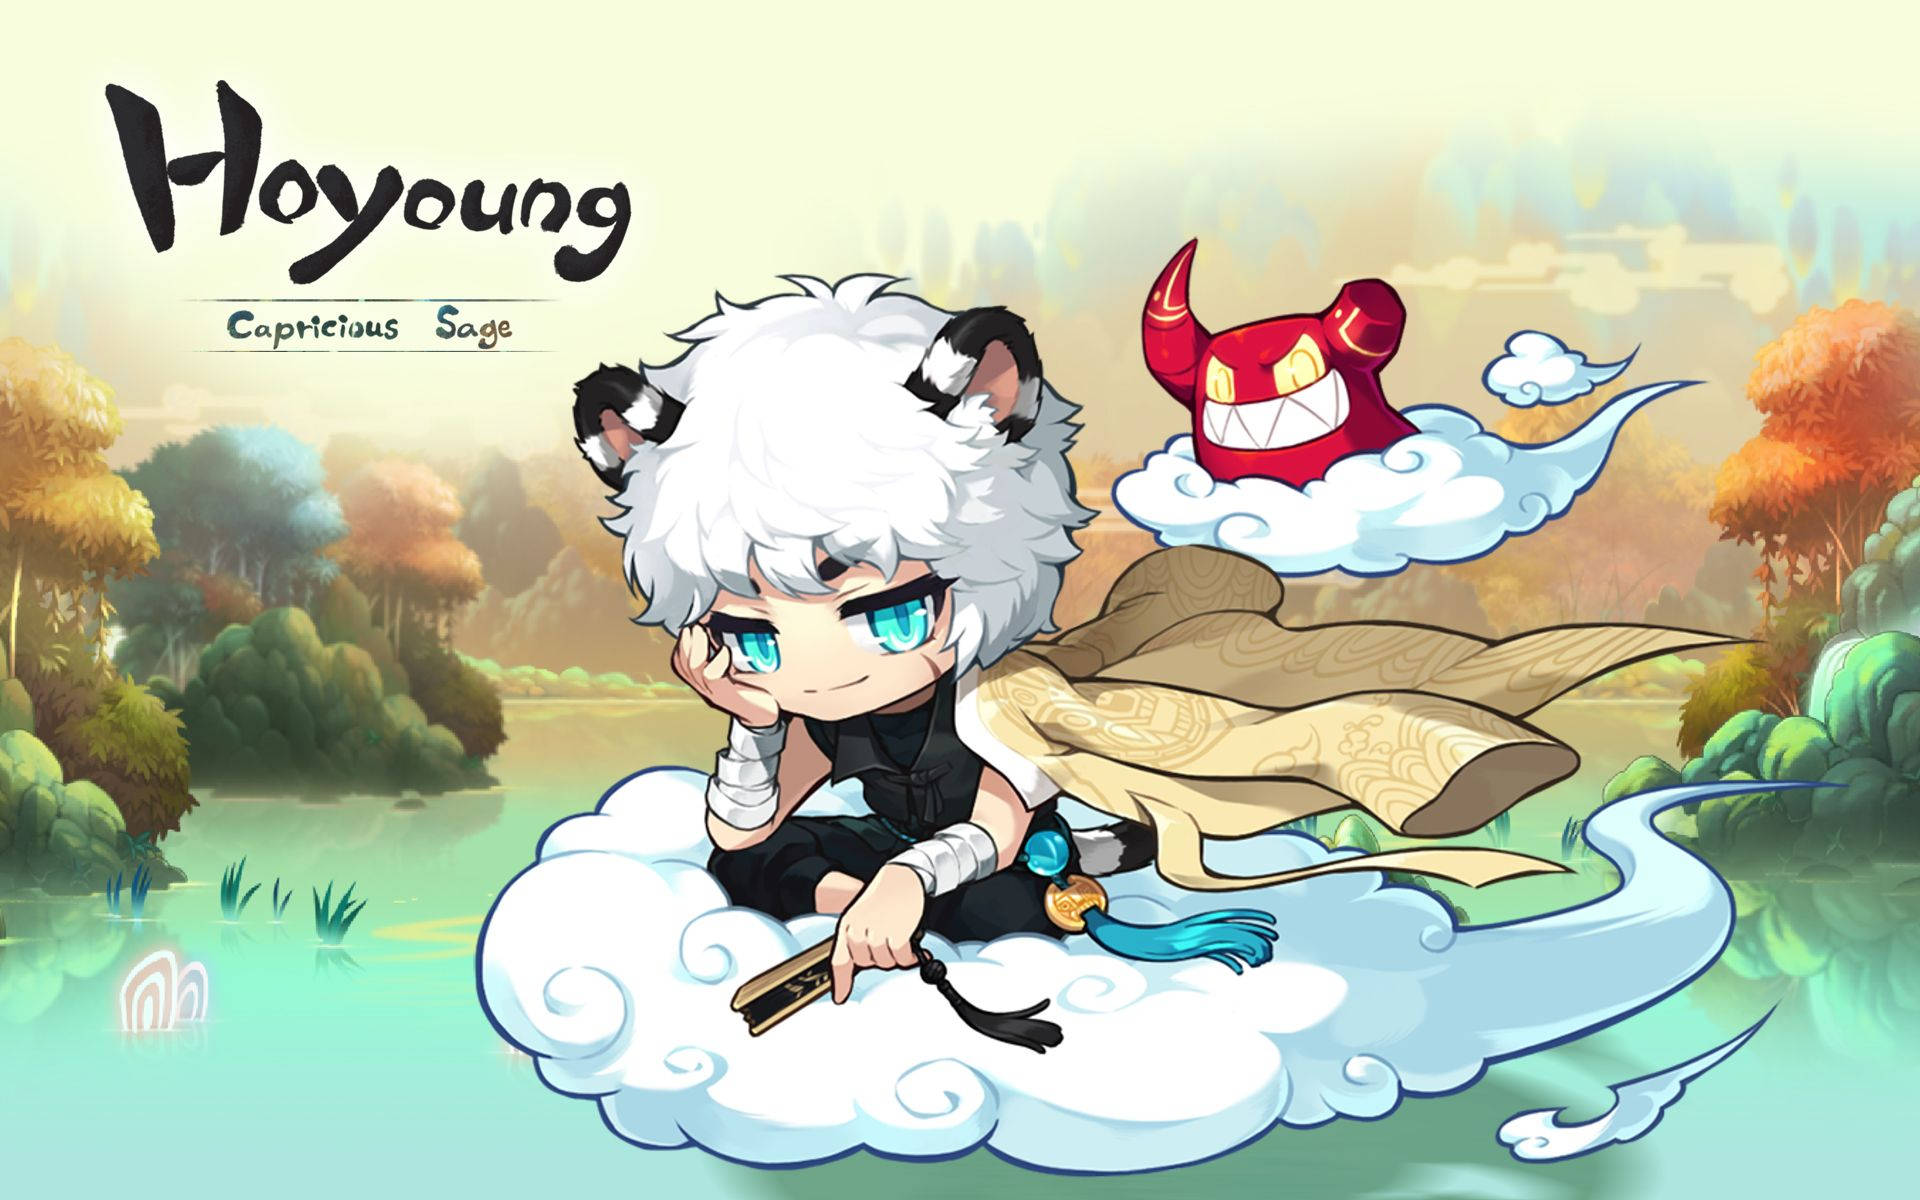 "Explore the enchanting world of MapleStory 2 - an exciting, vibrant MMORPG!" Wallpaper